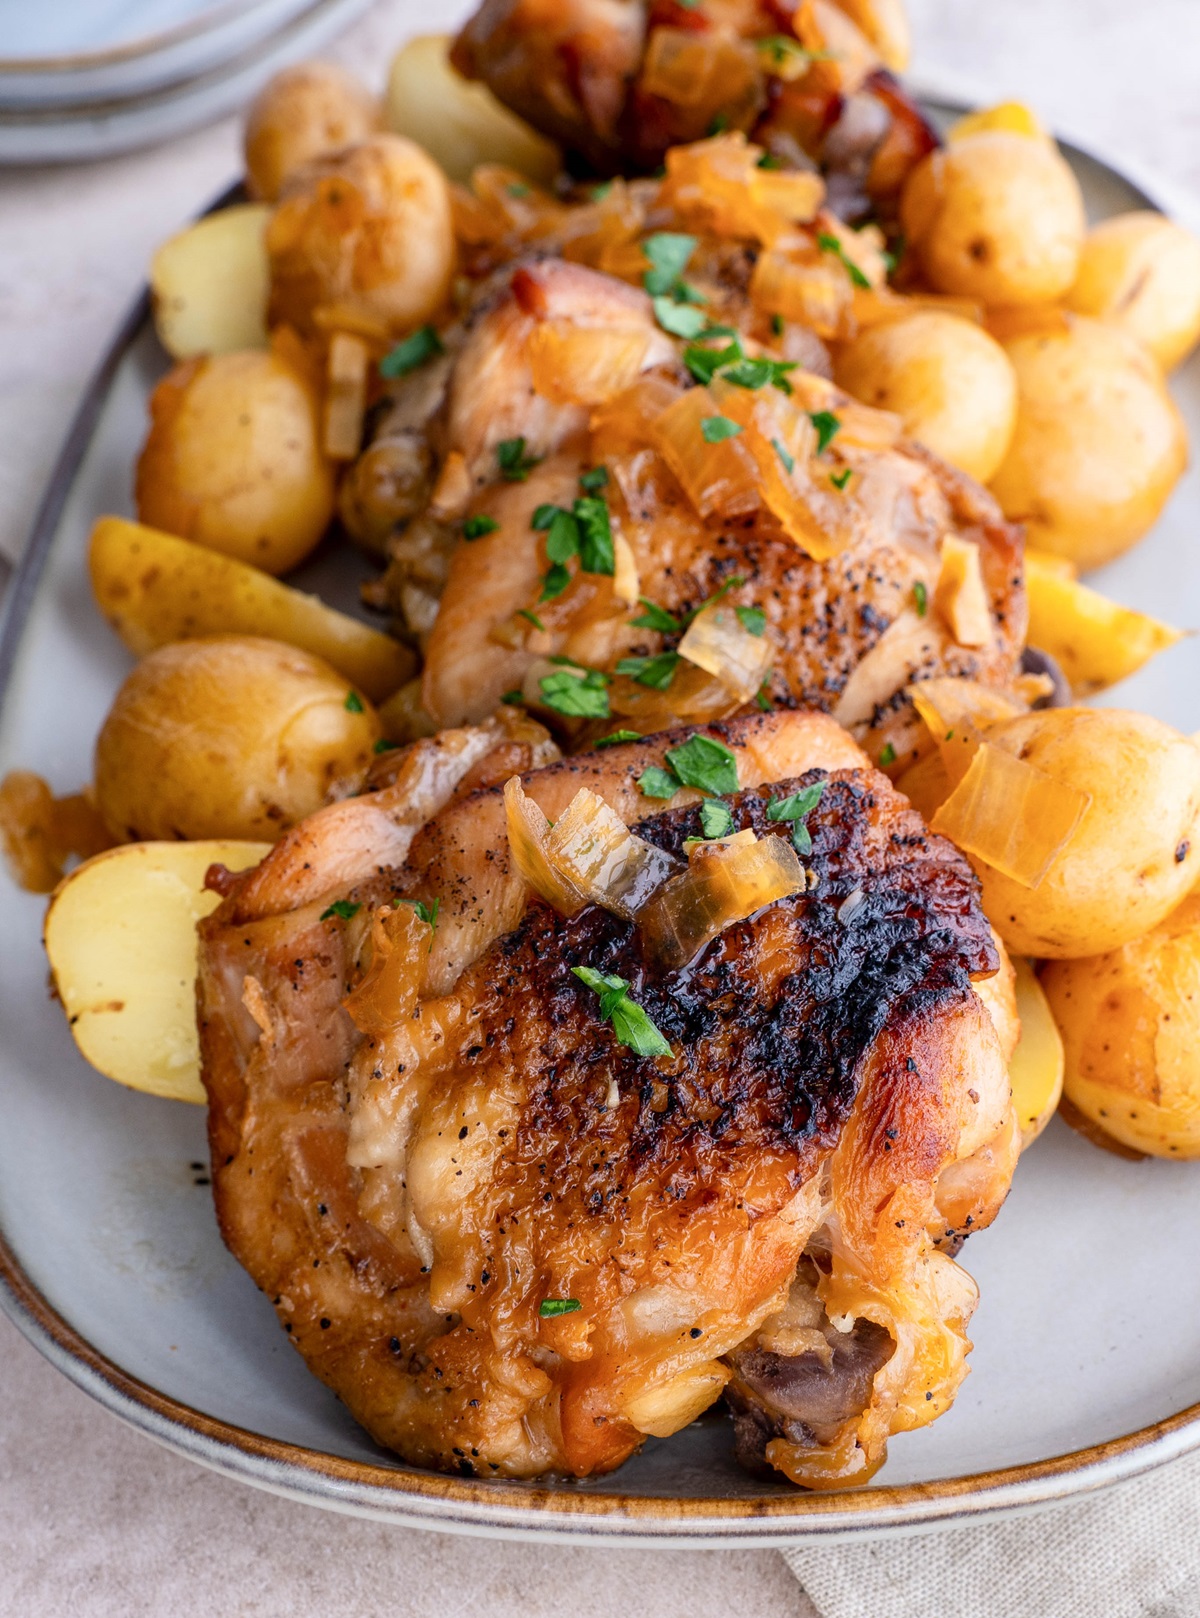 Platter of chicken thighs and potatoes, ready to serve.